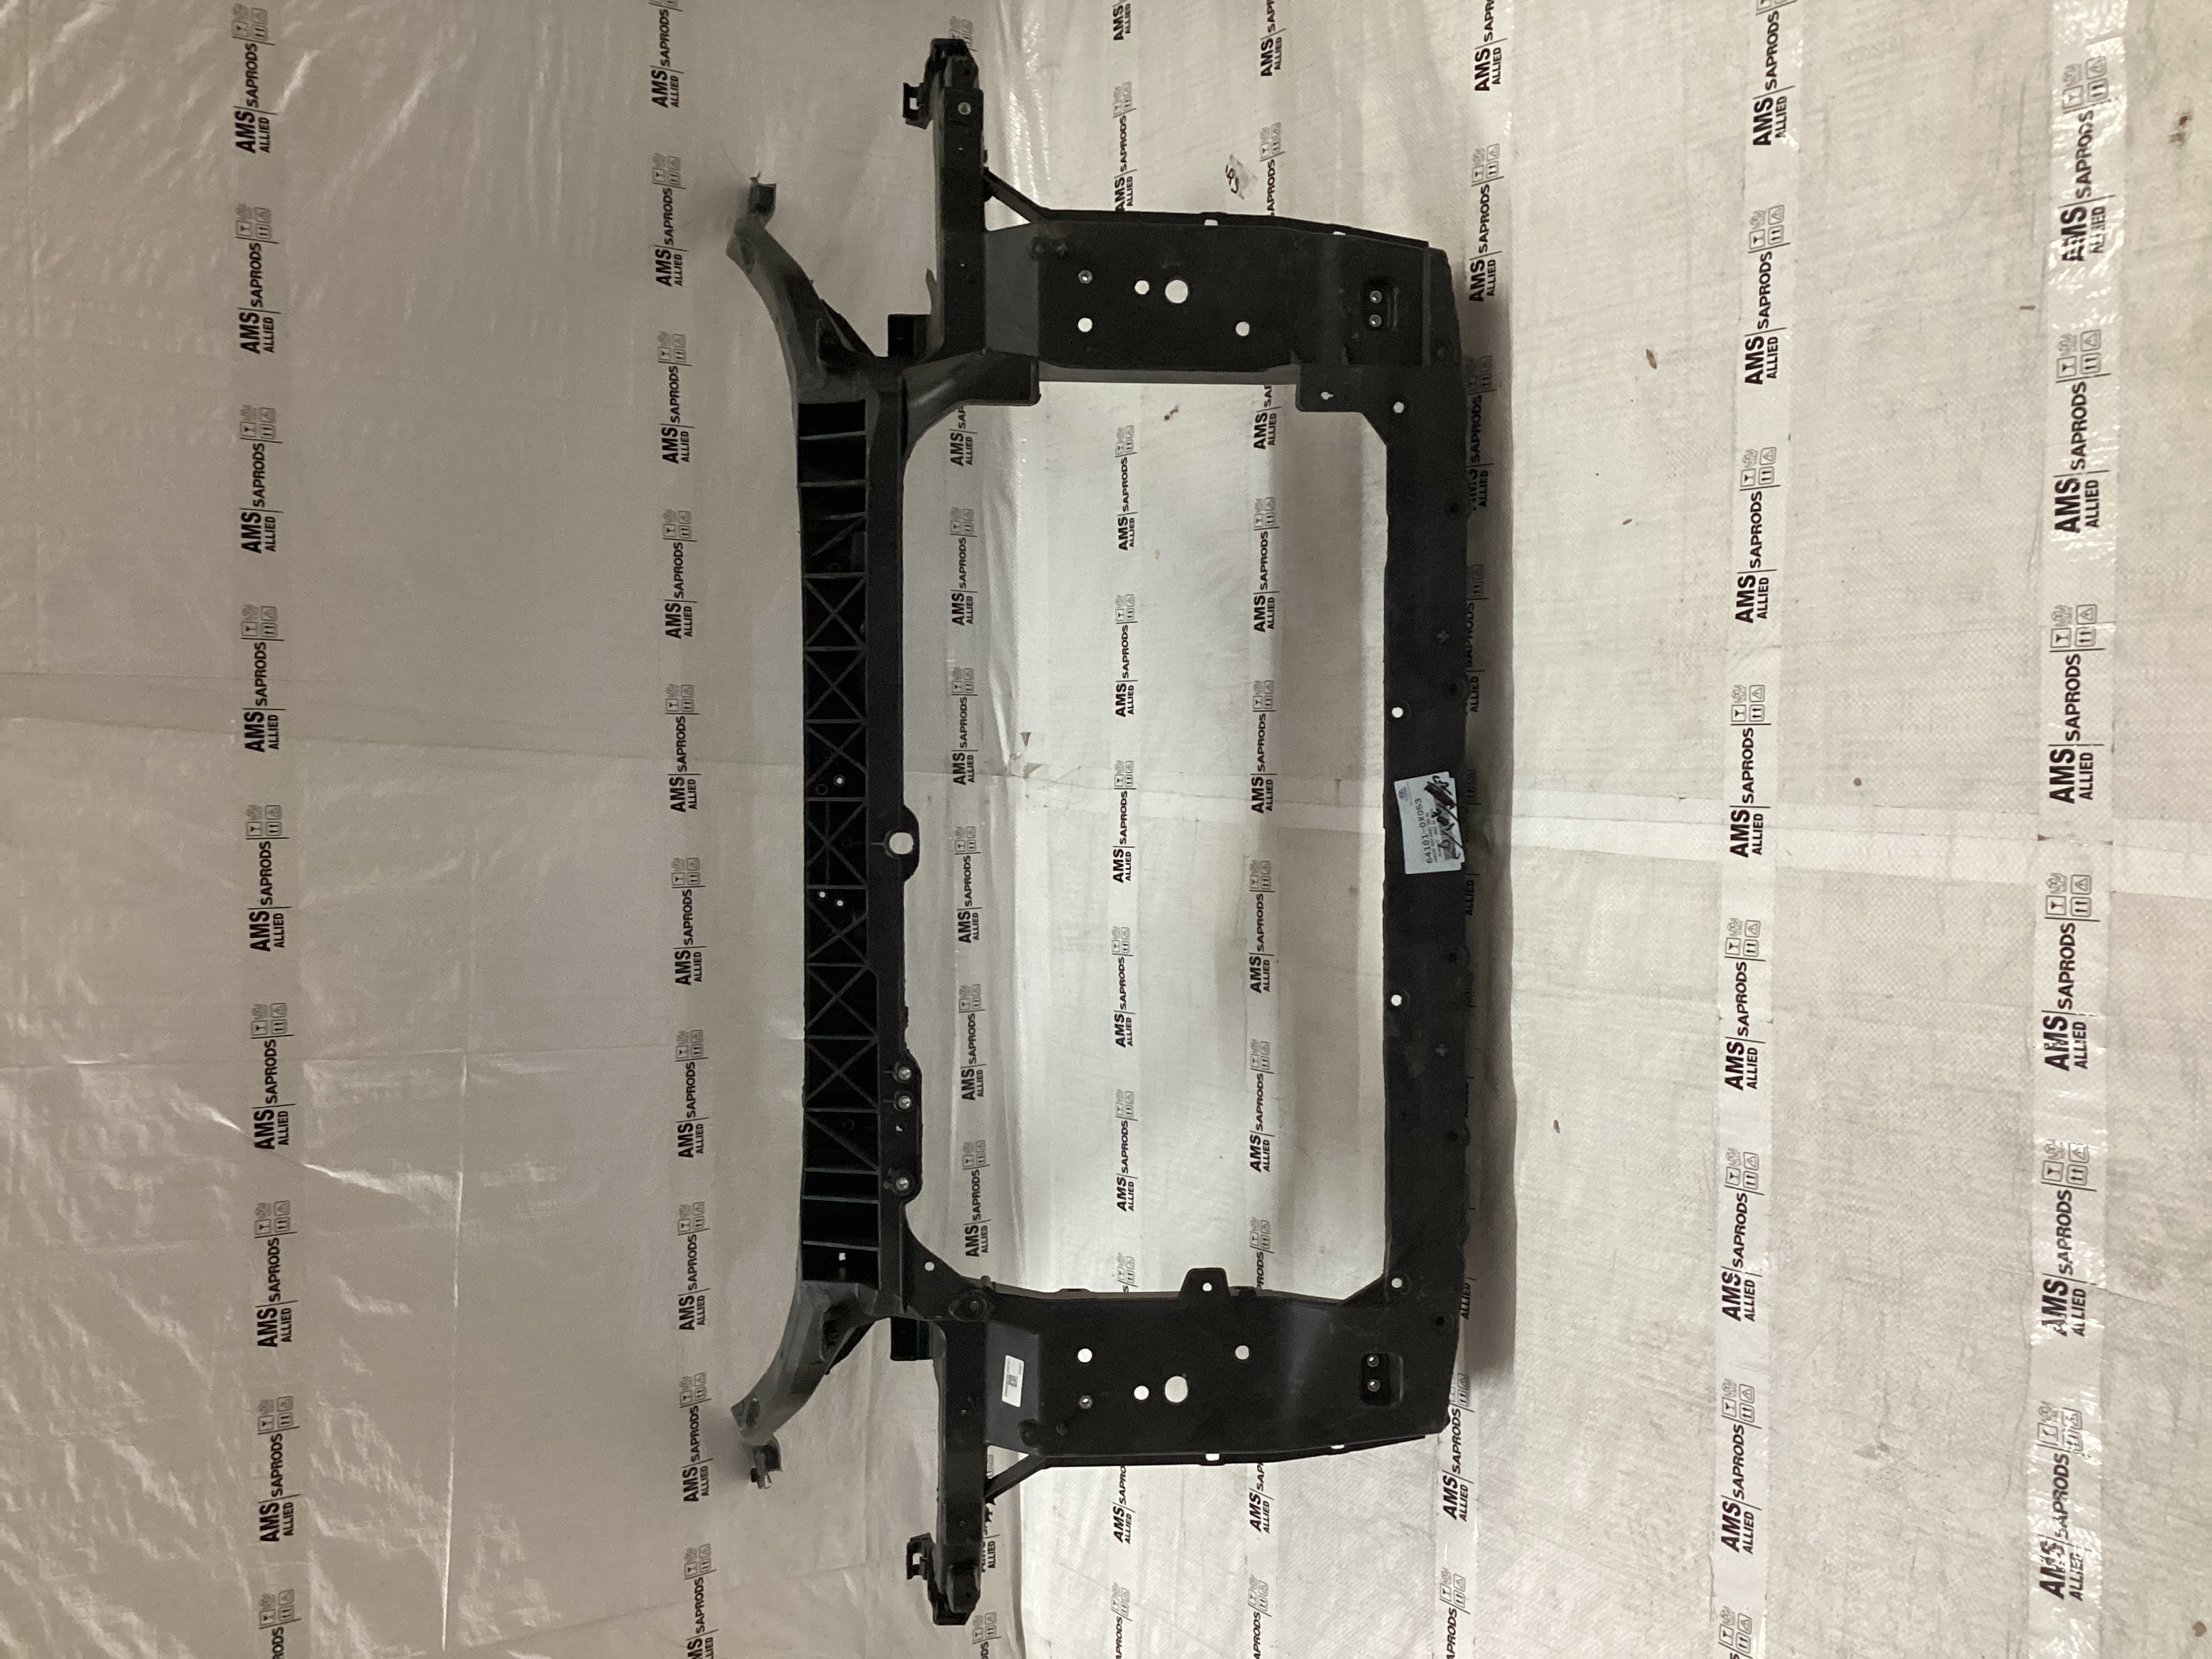 HYUNDAI I 10 CARRIER ASSY FRONT END MODULE 641010X053 STOCKID 2641